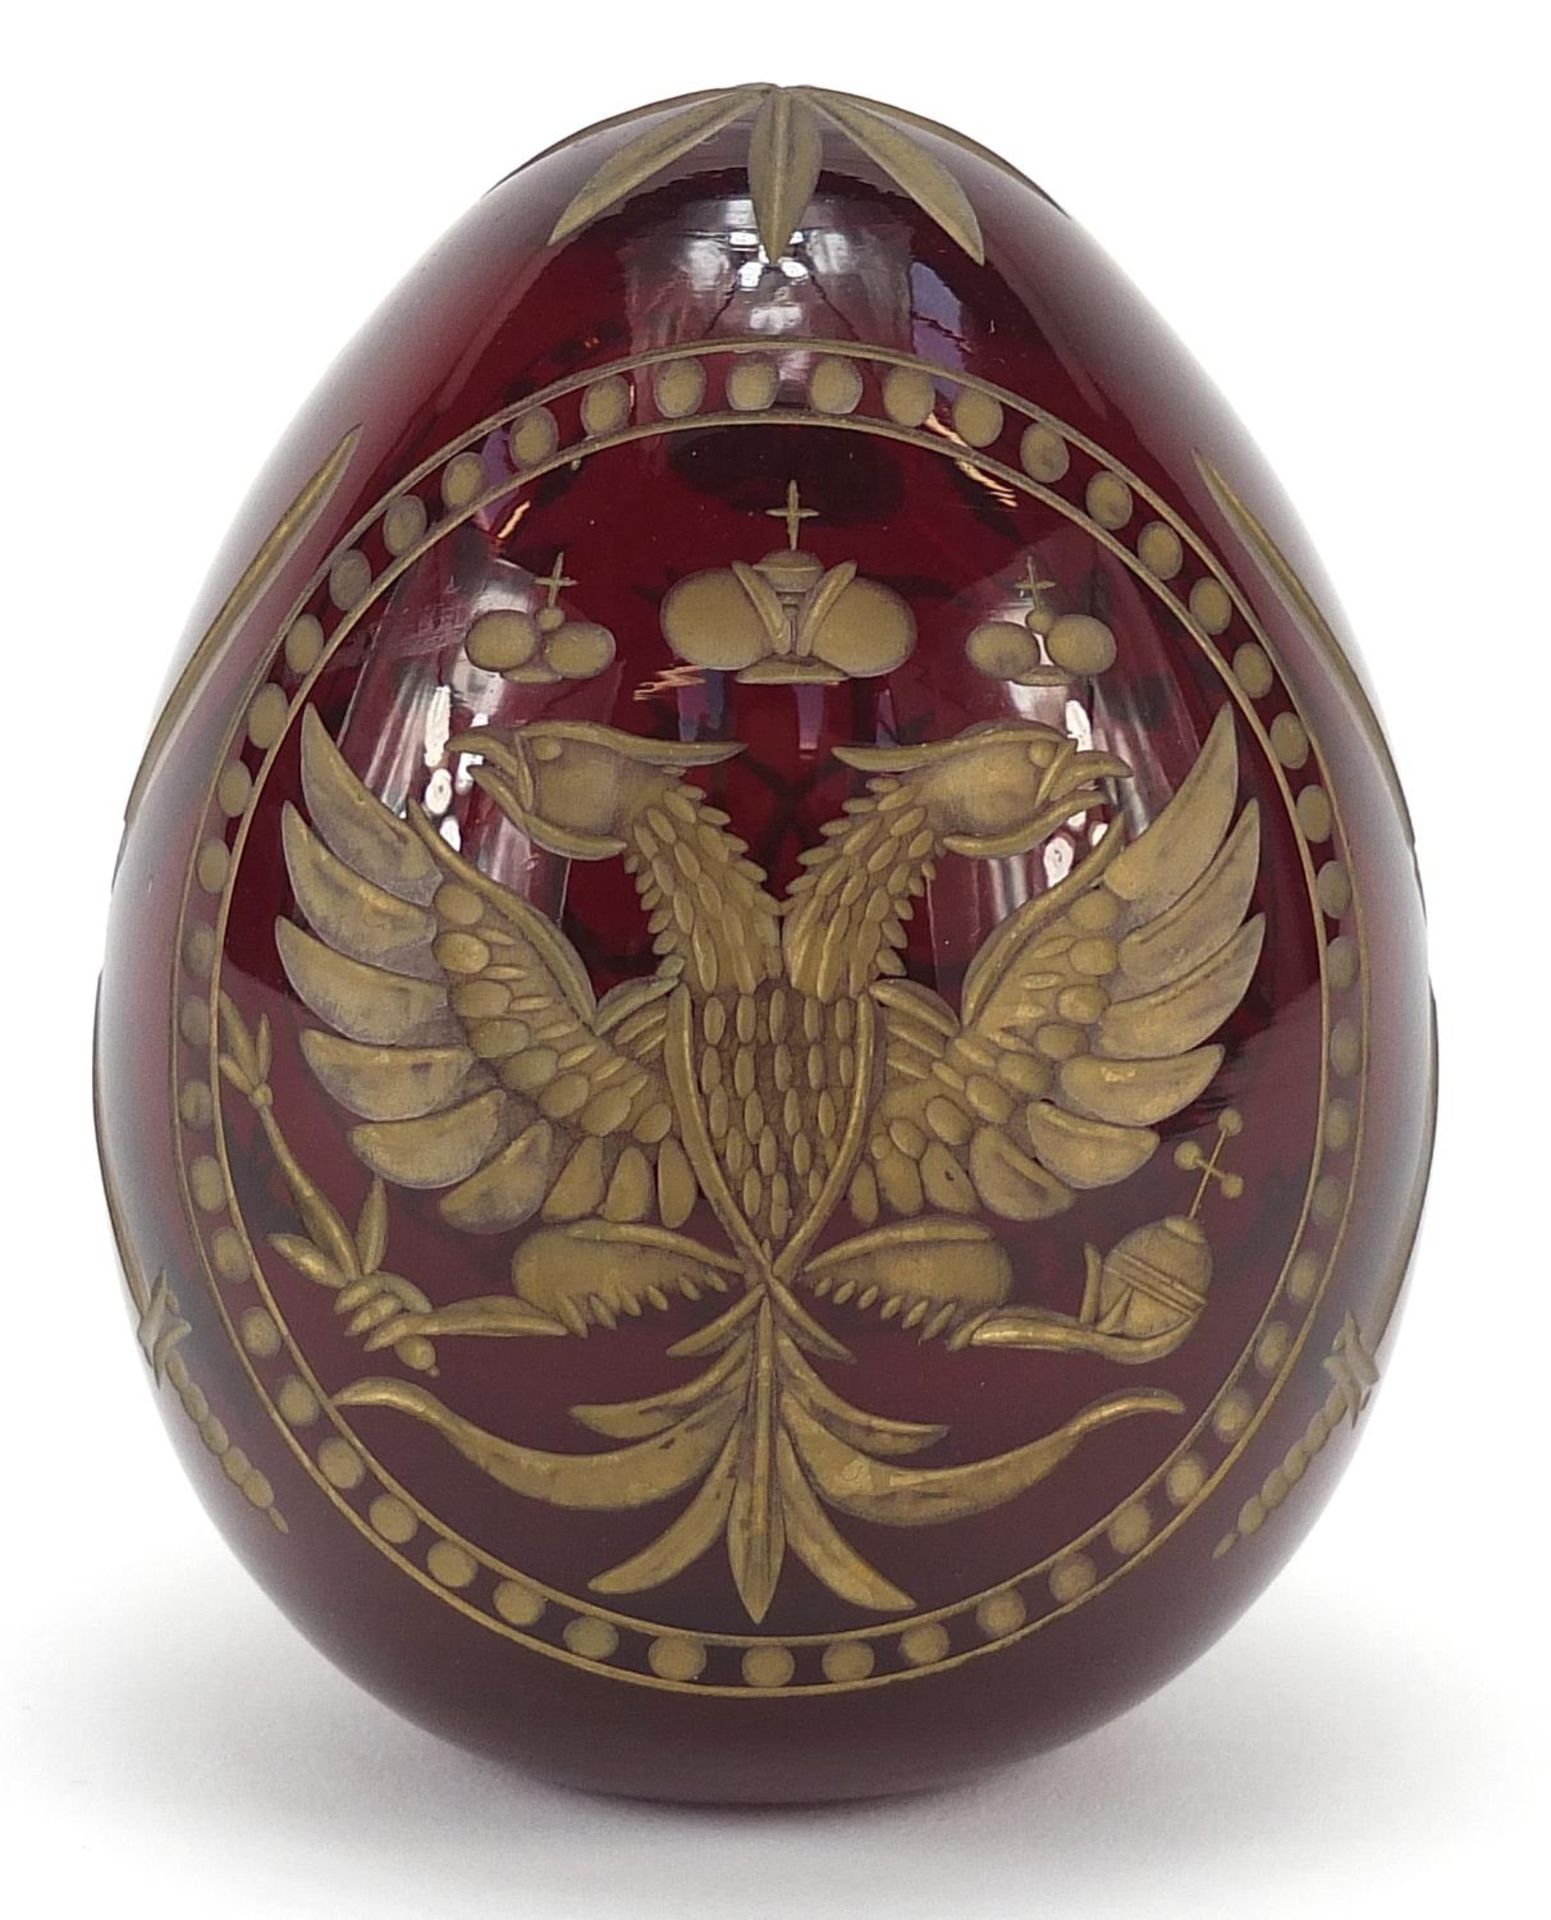 Russian red glass egg paperweight in the style of Faberge, etched with double headed eagle and